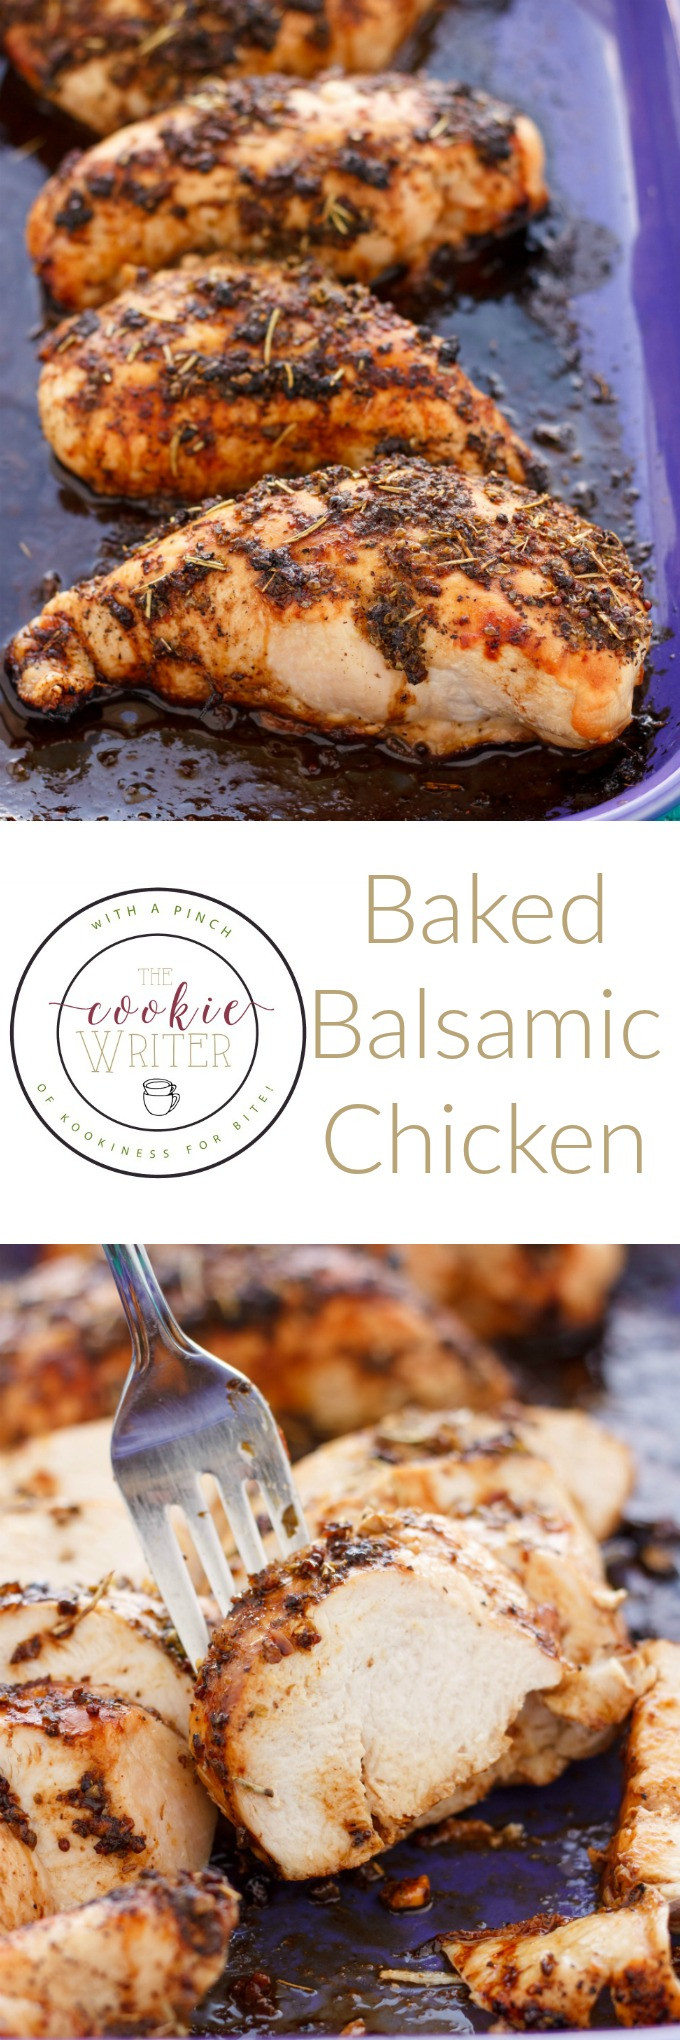 Is Baked Chicken Healthy
 Baked Balsamic Chicken The Cookie Writer